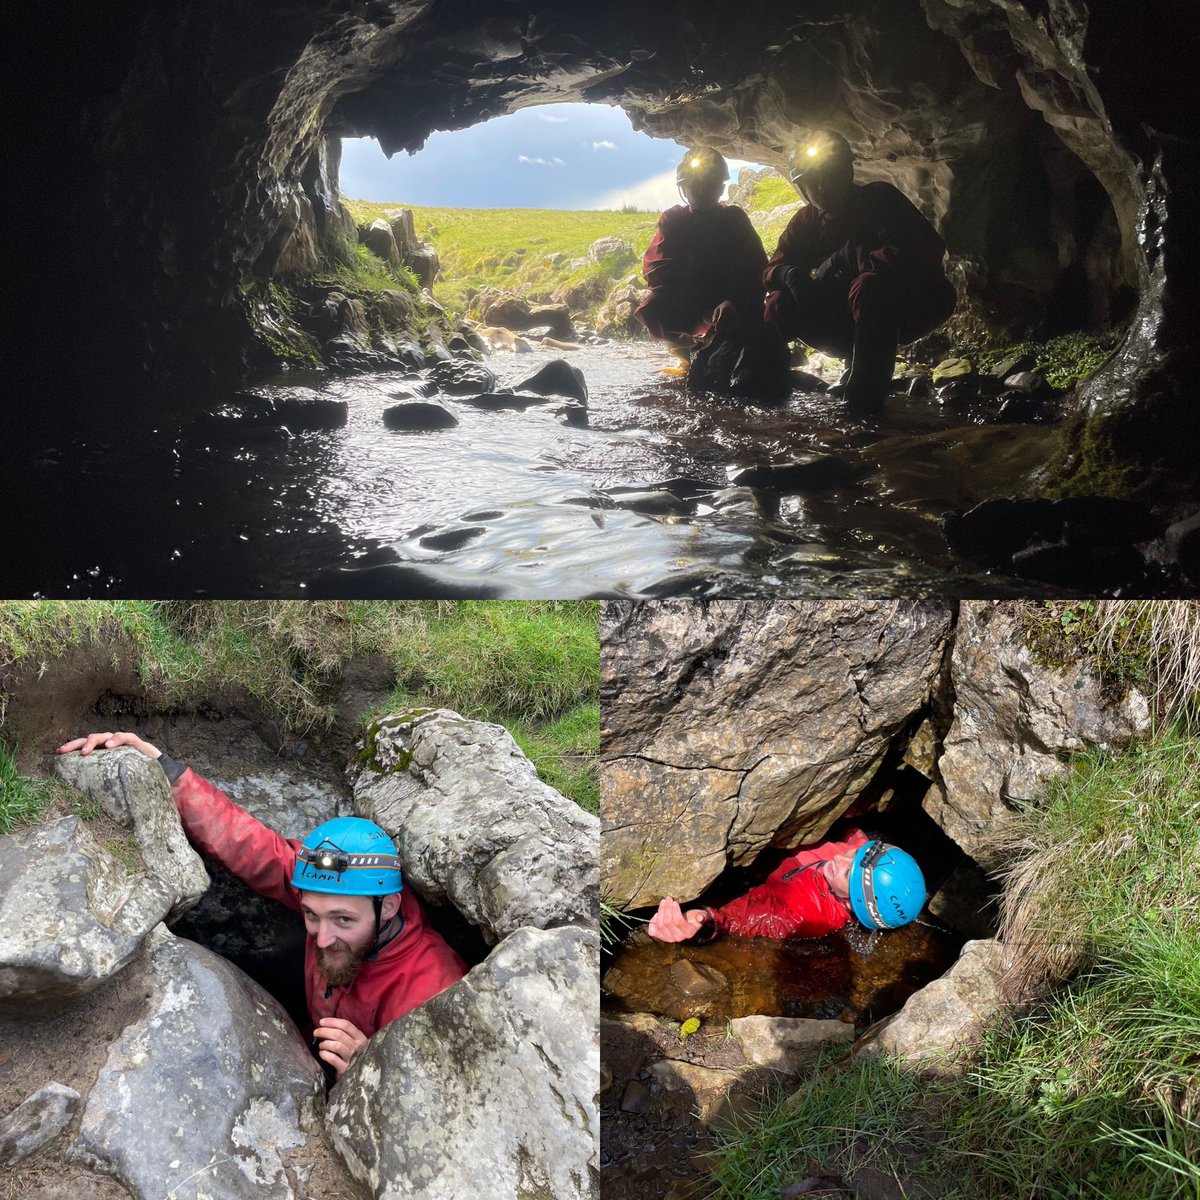 Great day caving with @WHSSchool in the Yorkshire Dales. Well done guys👍🏻 #outdoorlearning #caving #outdooreducation #cave @BritishCaving @KirkleesCouncil @CLOtC @FenixProducts @yorkshire_dales